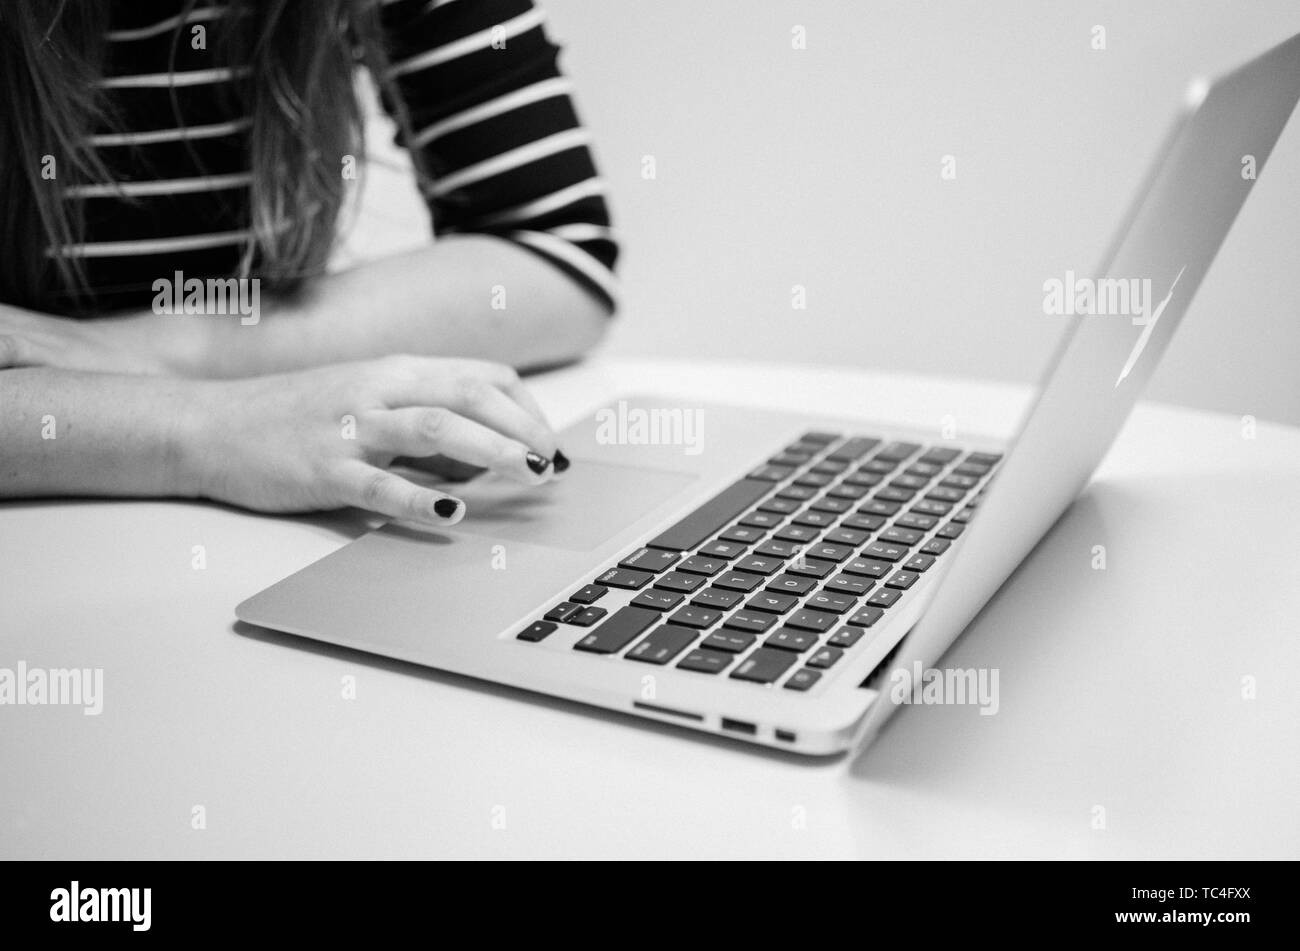 CIUDAD AUTONOMA DE BUENOS AIRES, ARGENTINA - Aug 09, 2016: Close up to a woman's hand while working with a computer. Stock Photo